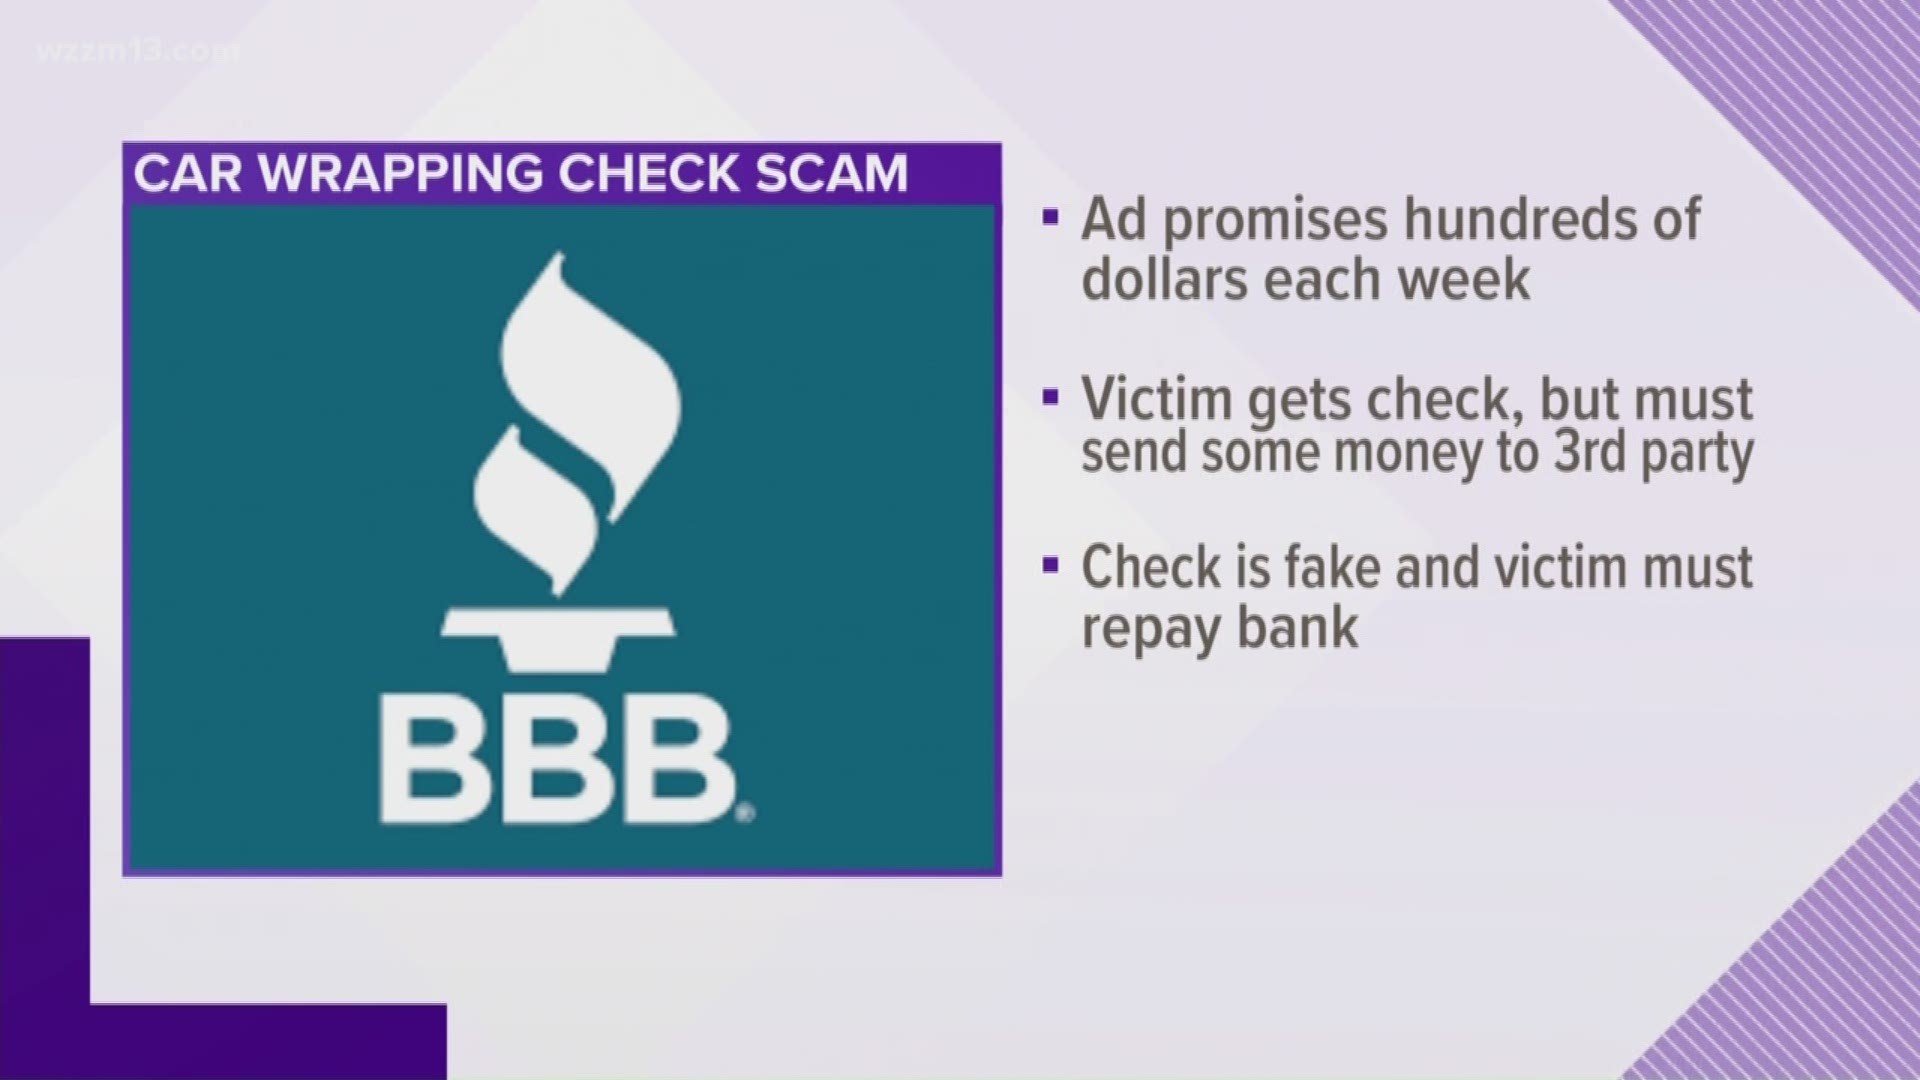 BBB warns of car wrapping scam